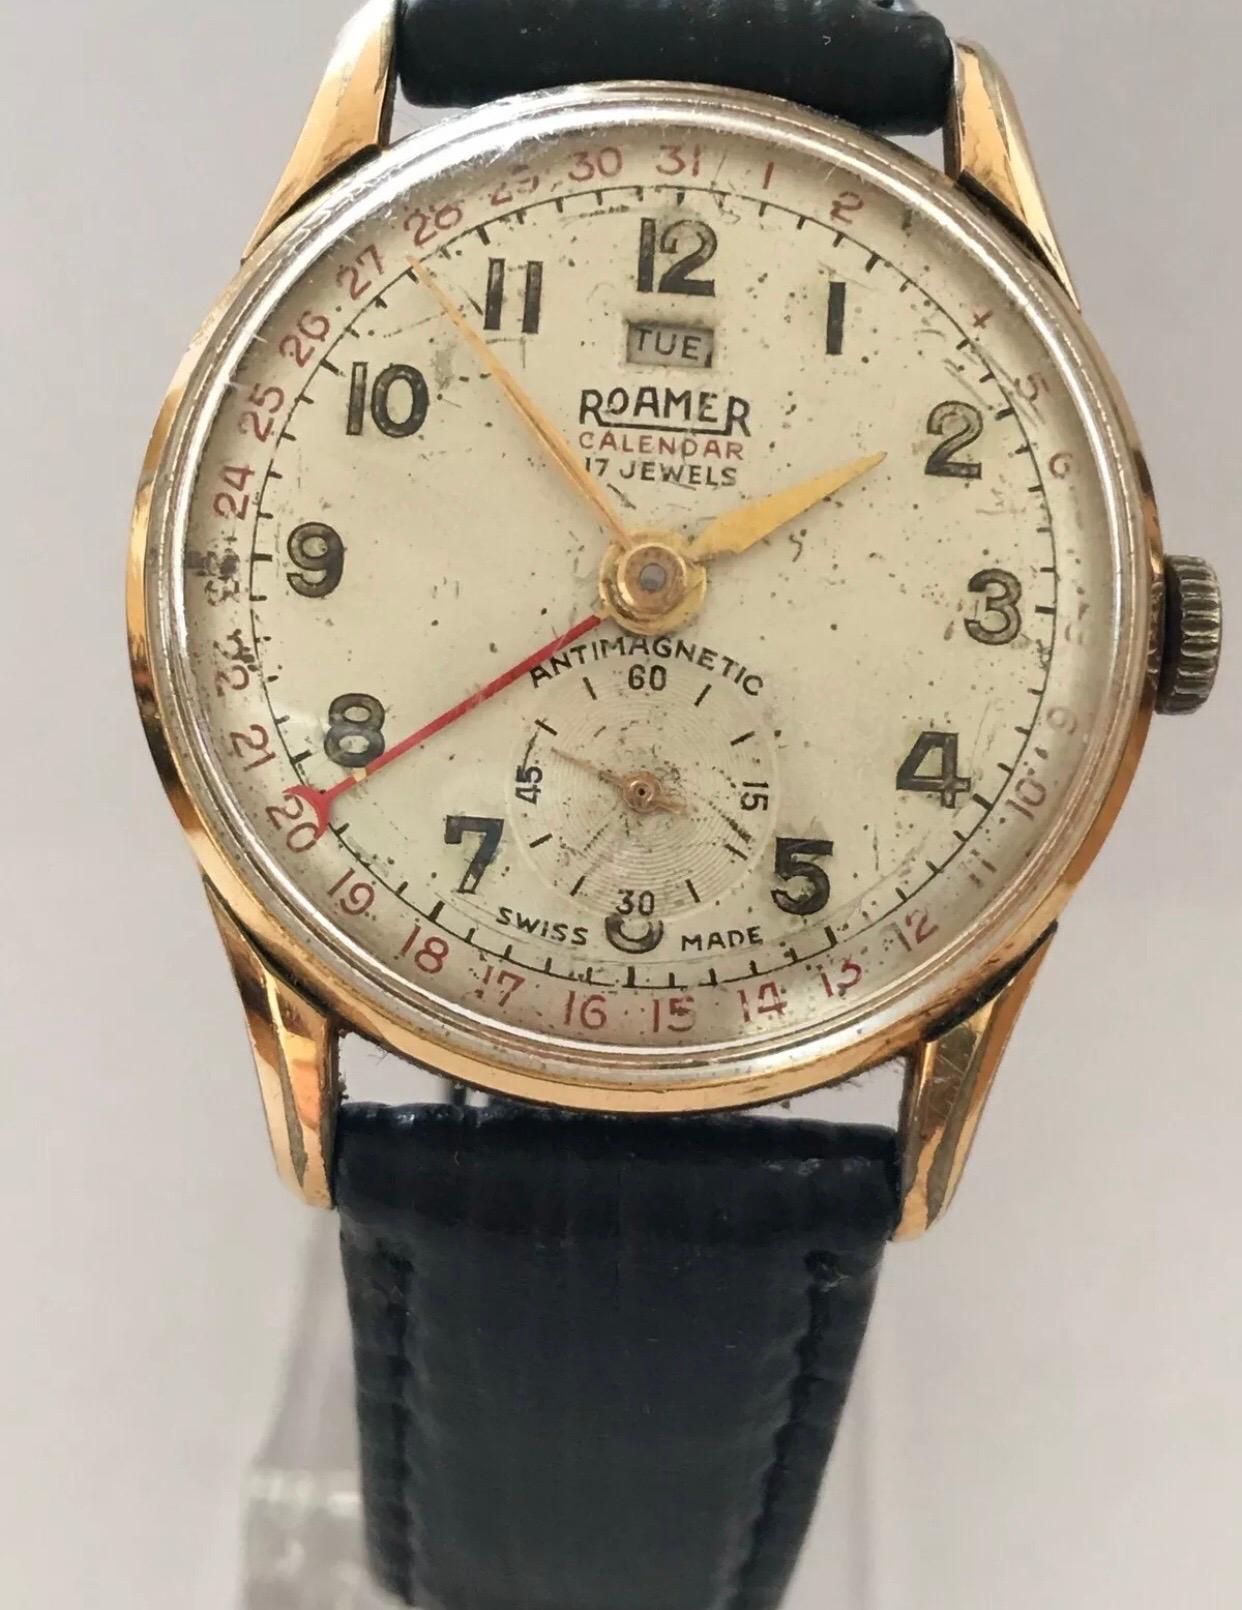 This beautiful vintage 34mm diameter (excluding crown) watch is in good working condition and it is running well. Visible signs of ageing and wear with light surface marks on the glass and on the watch case as shown. The Dial has aged. The Gold